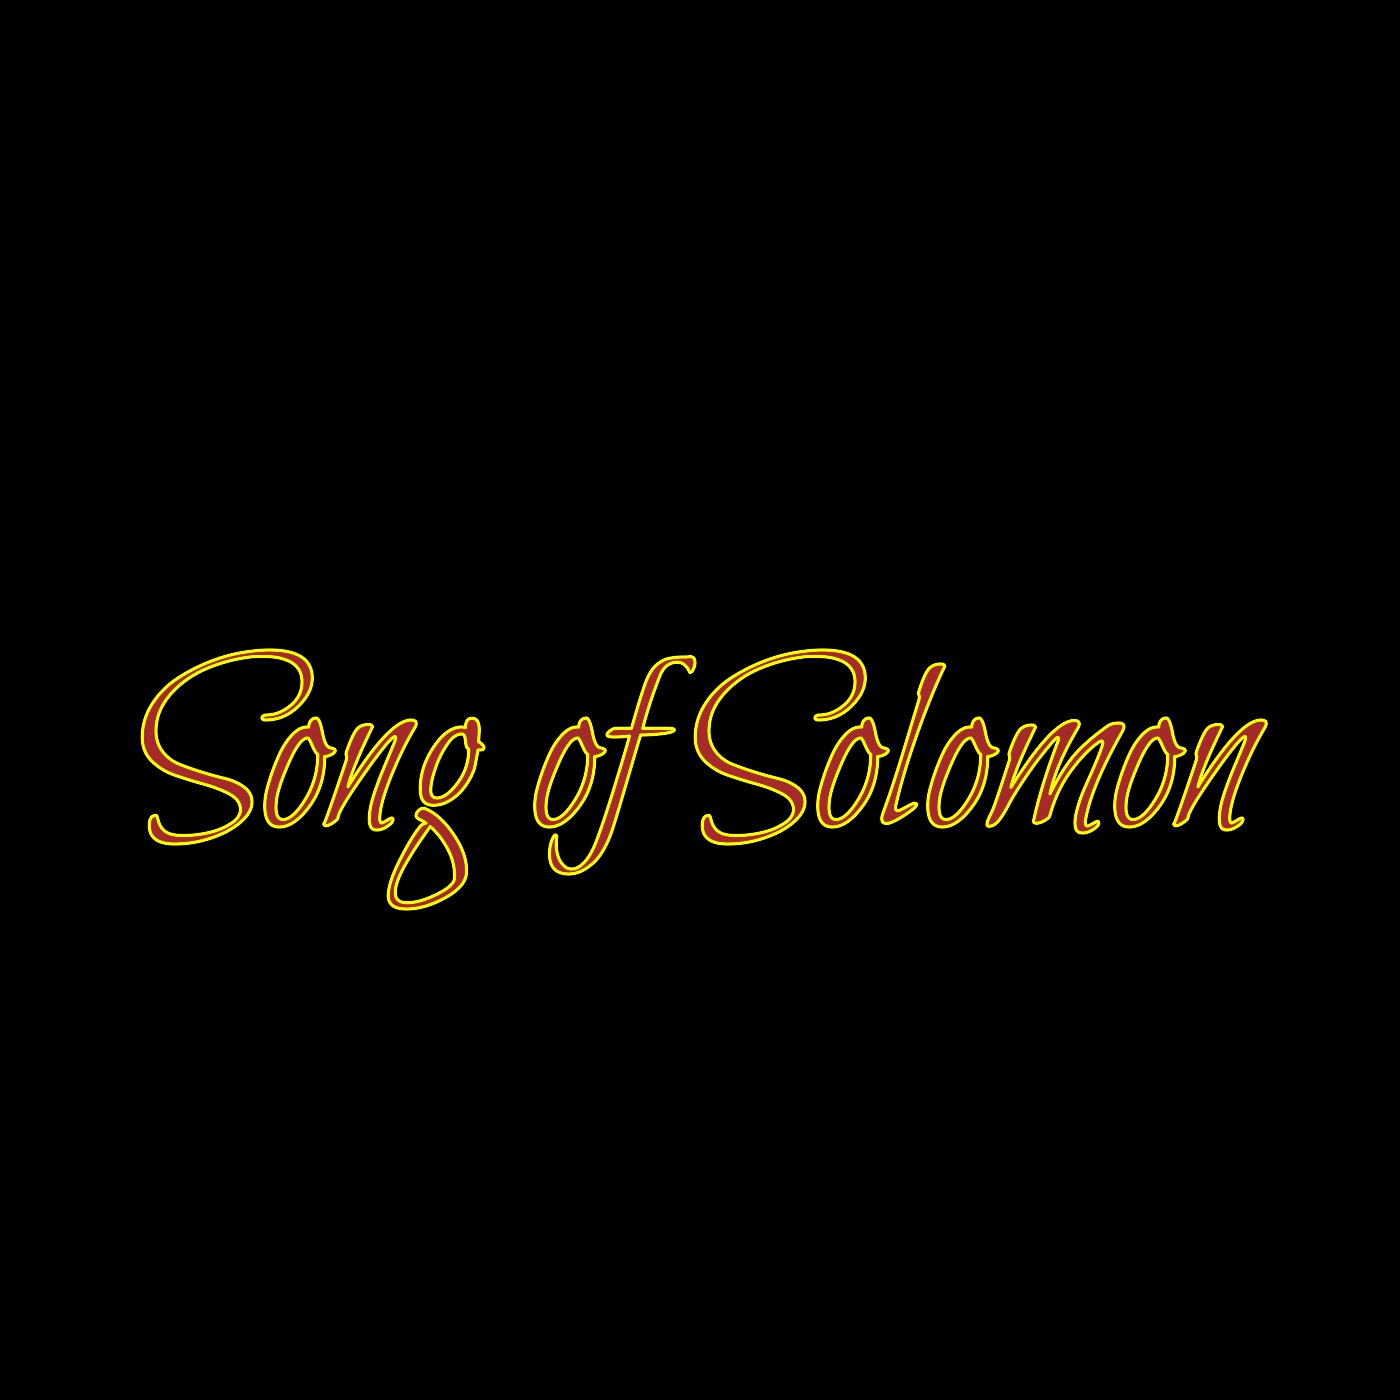 Song of Solomon (Canticles) 5: I am come into my garden, my sister, my spouse: I have gathered my myrrh with my spice; I have eaten my honeycomb with my honey; I have drunk my wine with my milk: eat, 